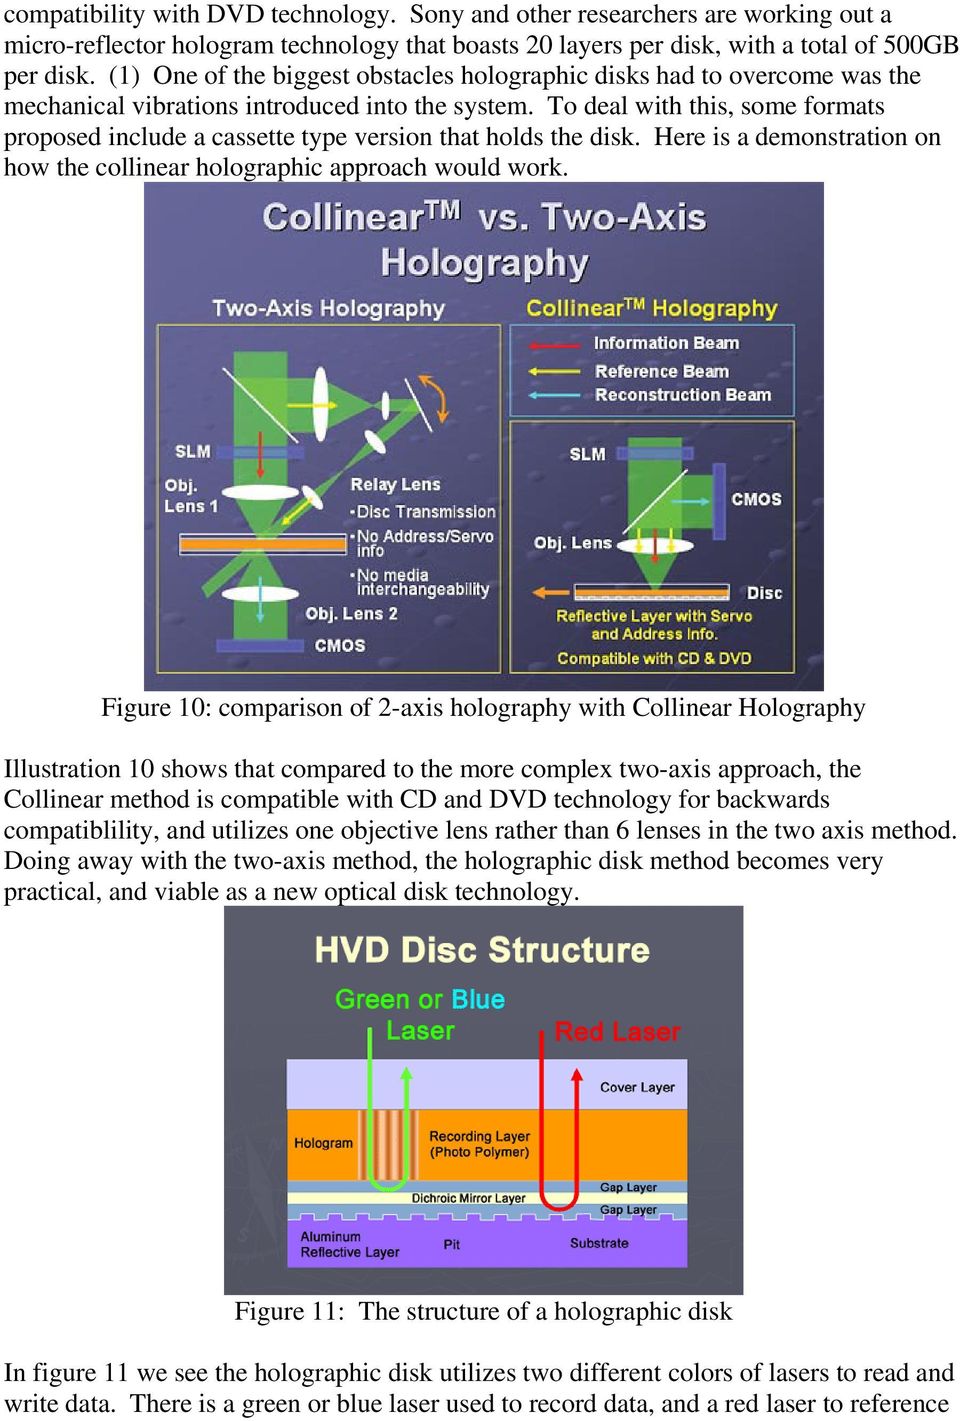 To deal with this, some formats proposed include a cassette type version that holds the disk. Here is a demonstration on how the collinear holographic approach would work.